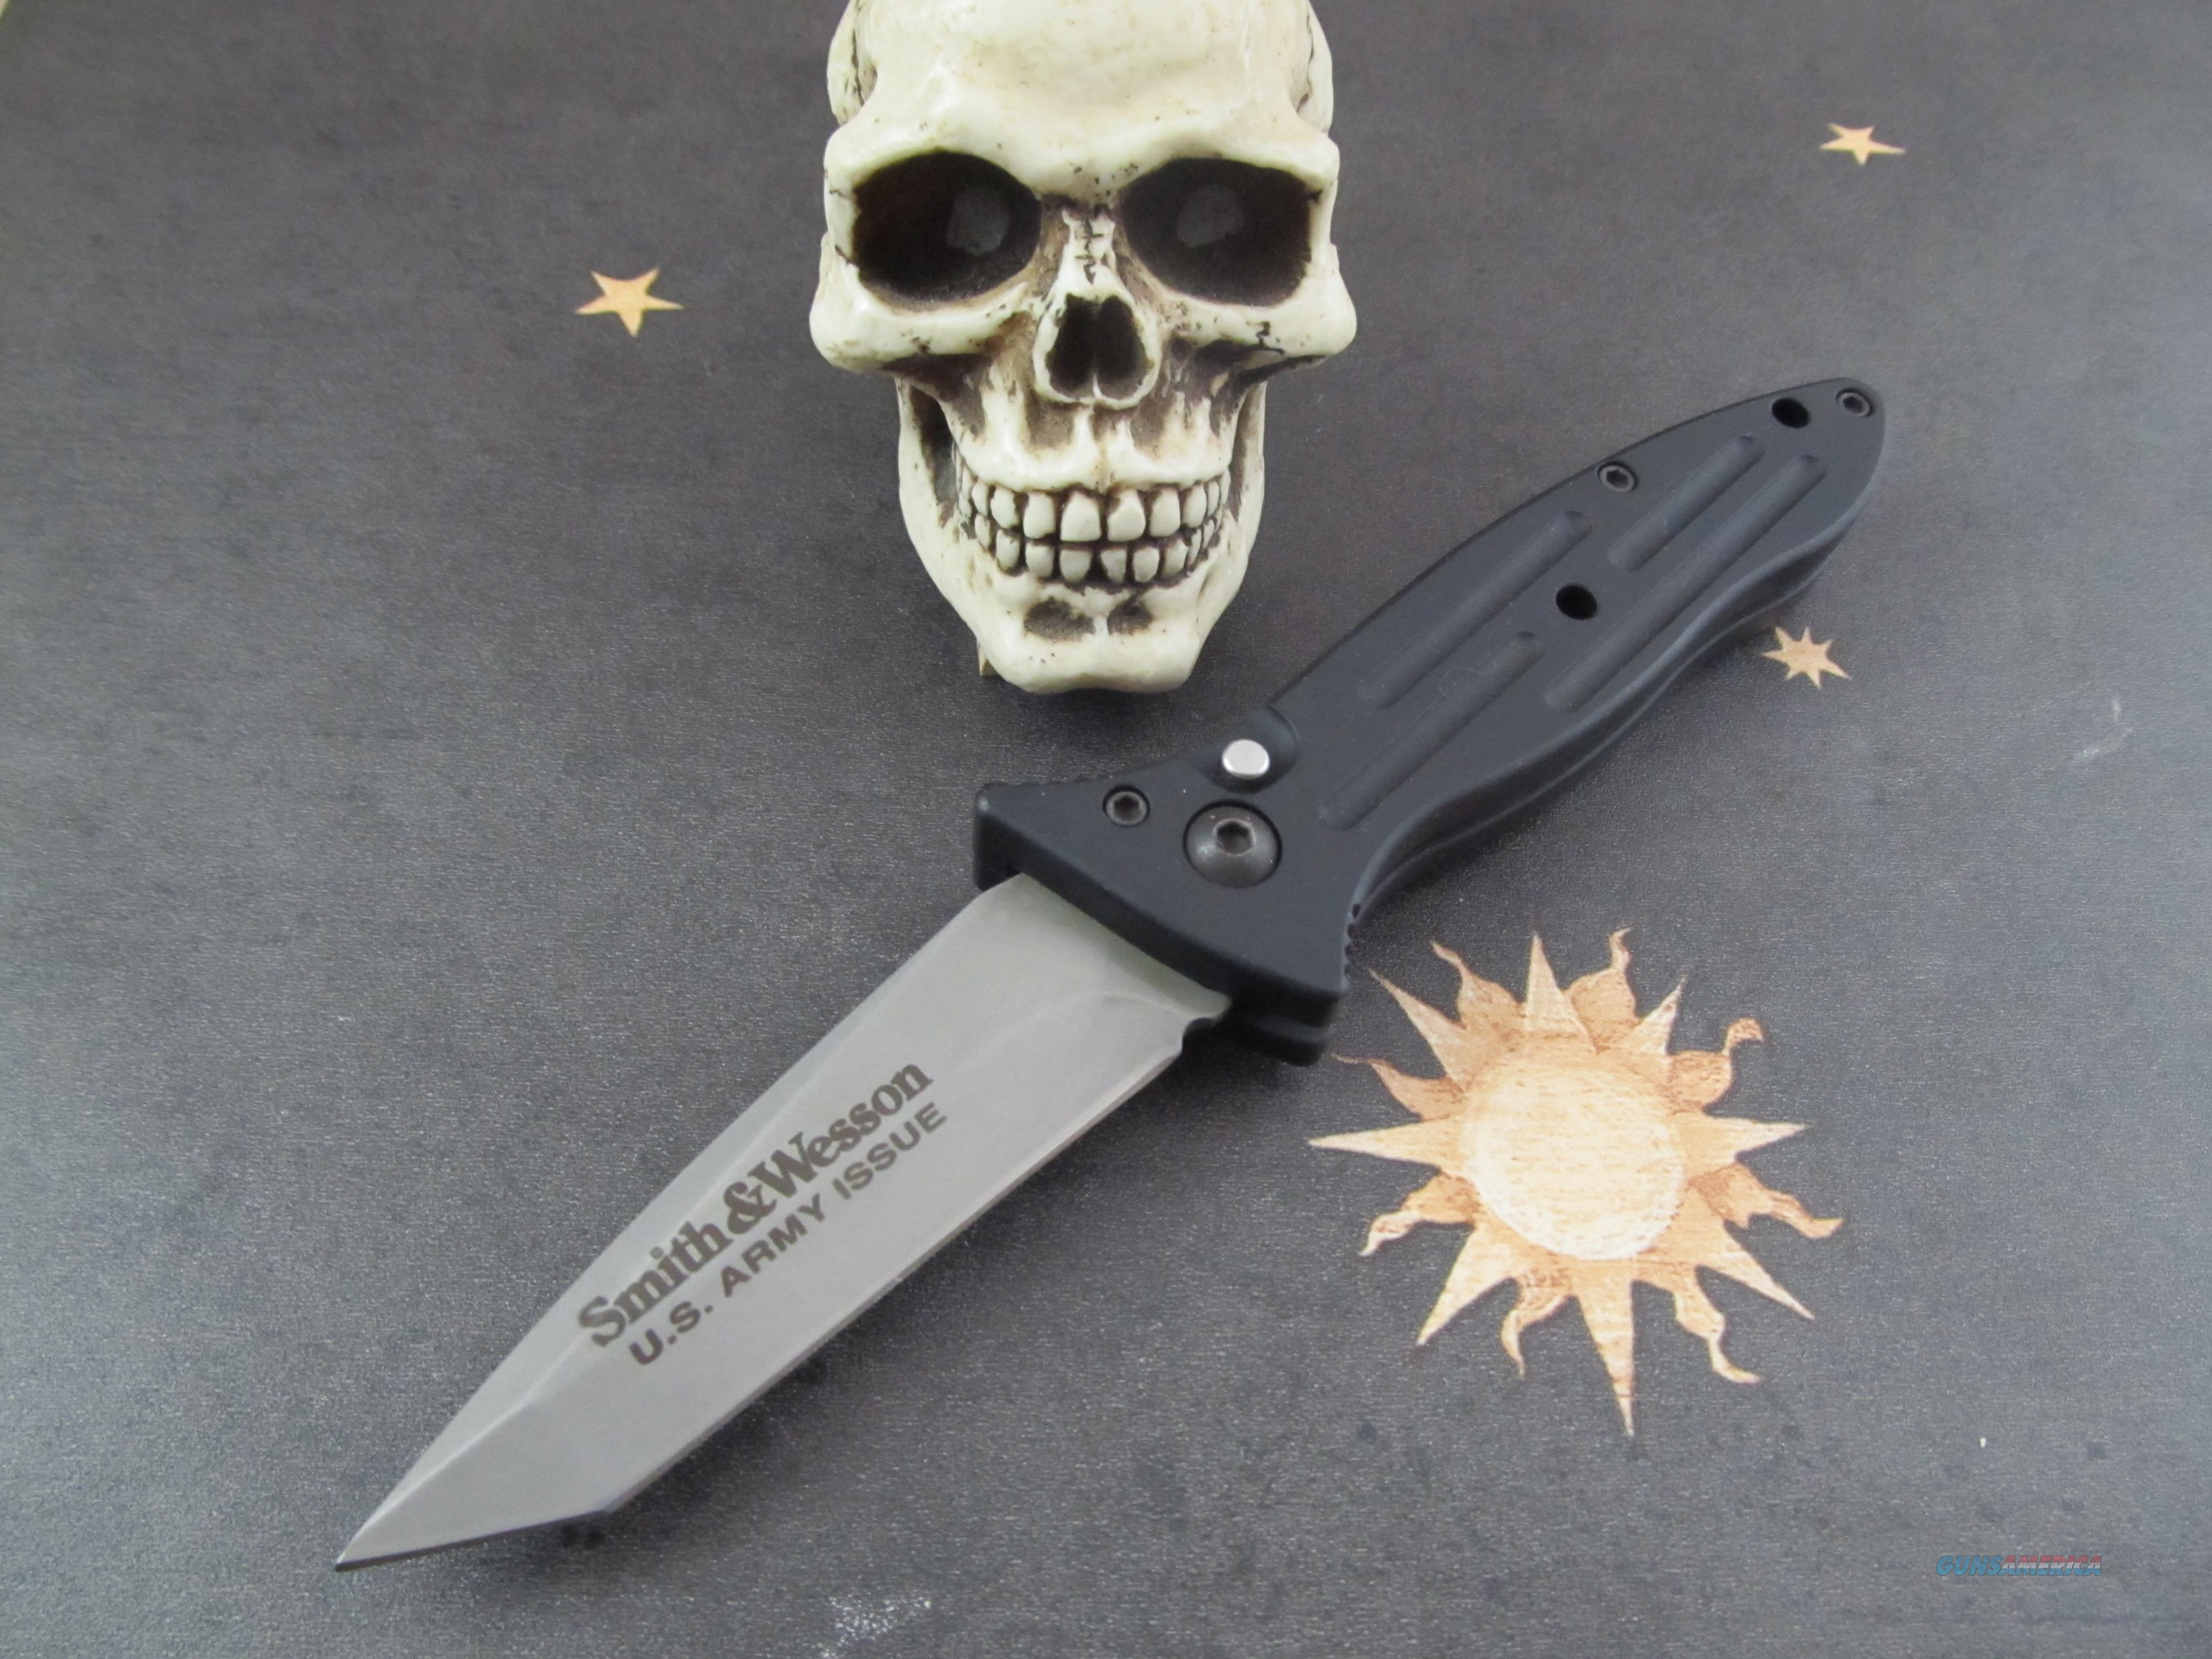 US Army Issued Knife: The Ultimate Guide to Choosing the Best - News ...